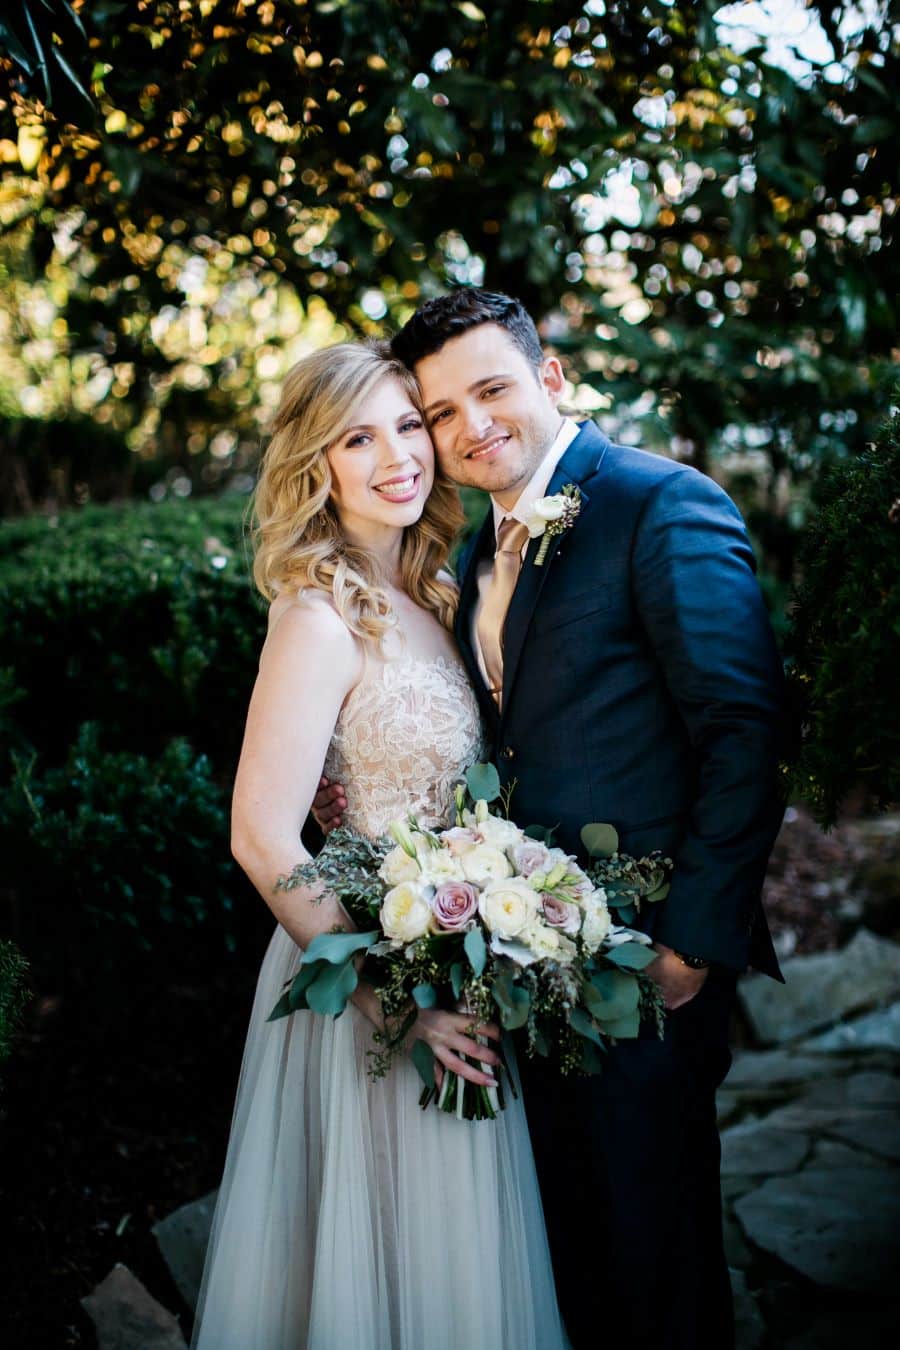 Bride and groom smiling in garden portraits / Elopement / Spring / March / Dusty Rose